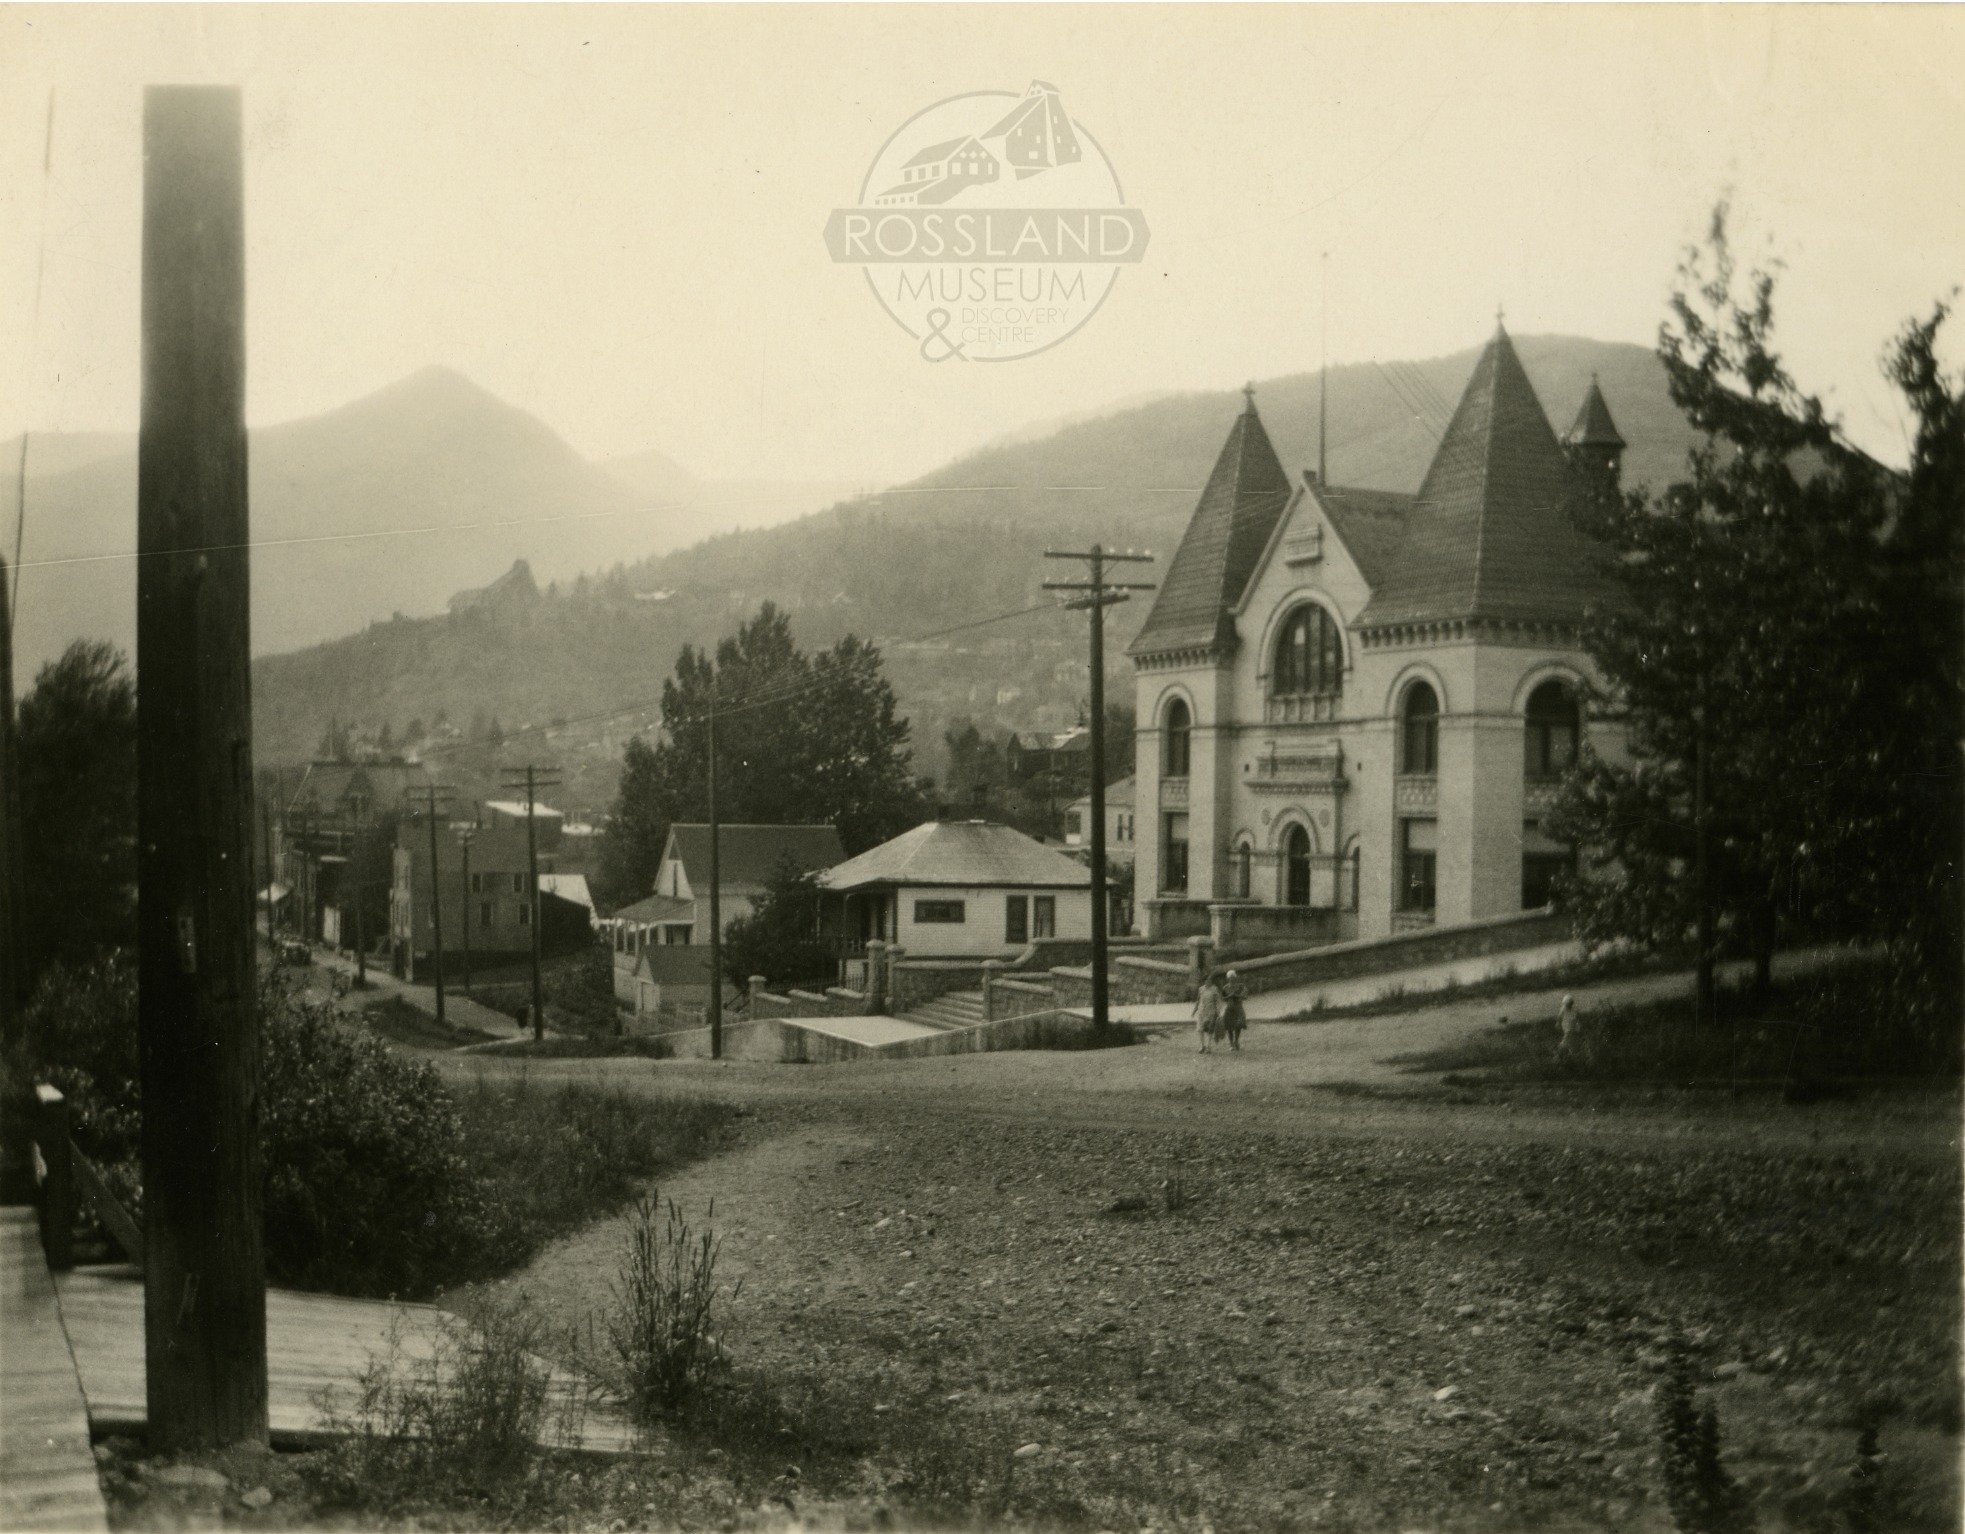 May is Museum Month! Did you know that the Rossland Museum was originally established by the Rossland Rotary Club - in the basement of the Court House? We operated out of that location from 1954 to 1967 when we moved to our current location. We'll be